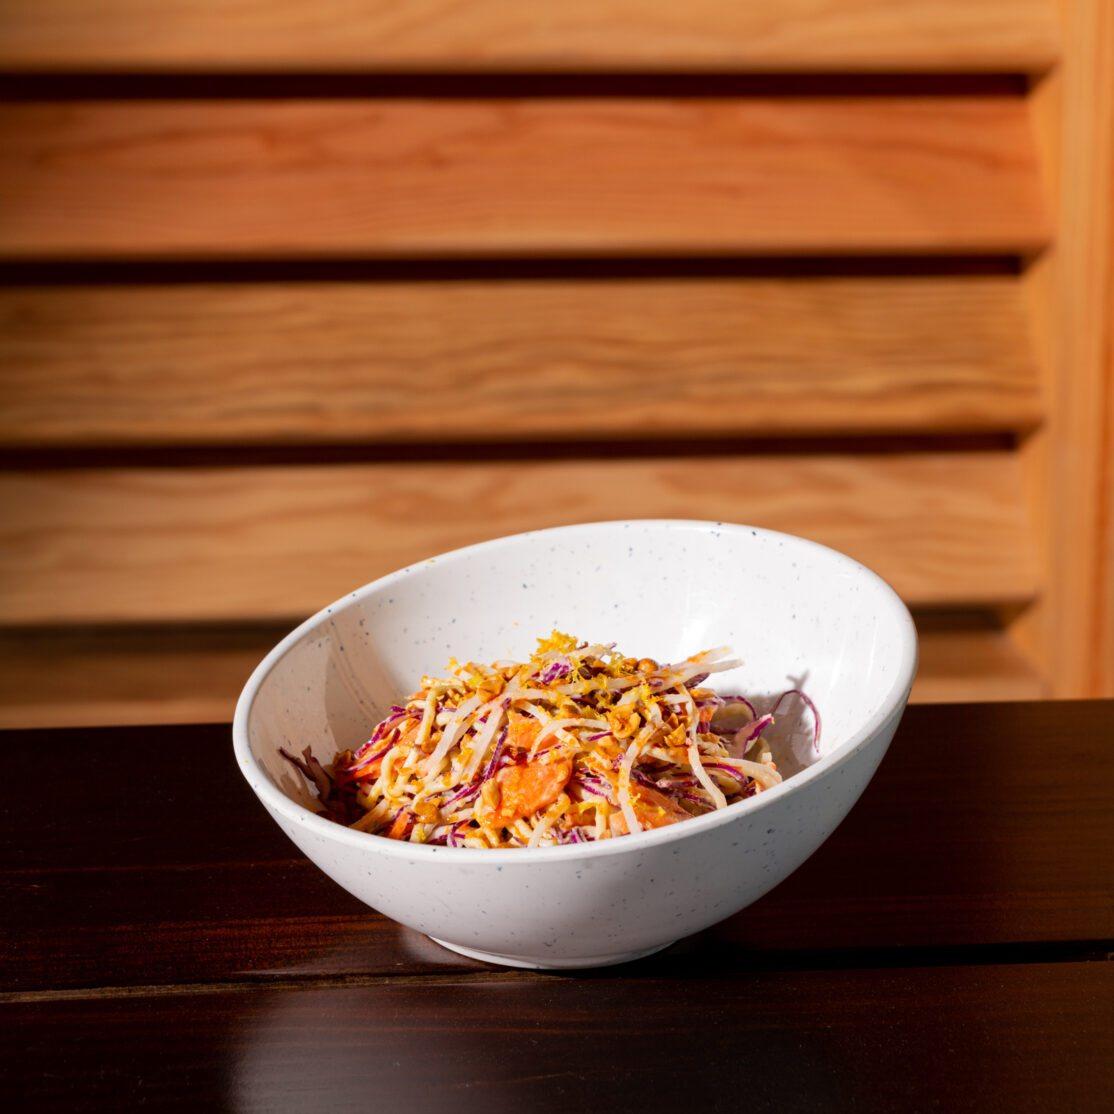 A close-up of chilled ginger noodle salad served in a white bowl.